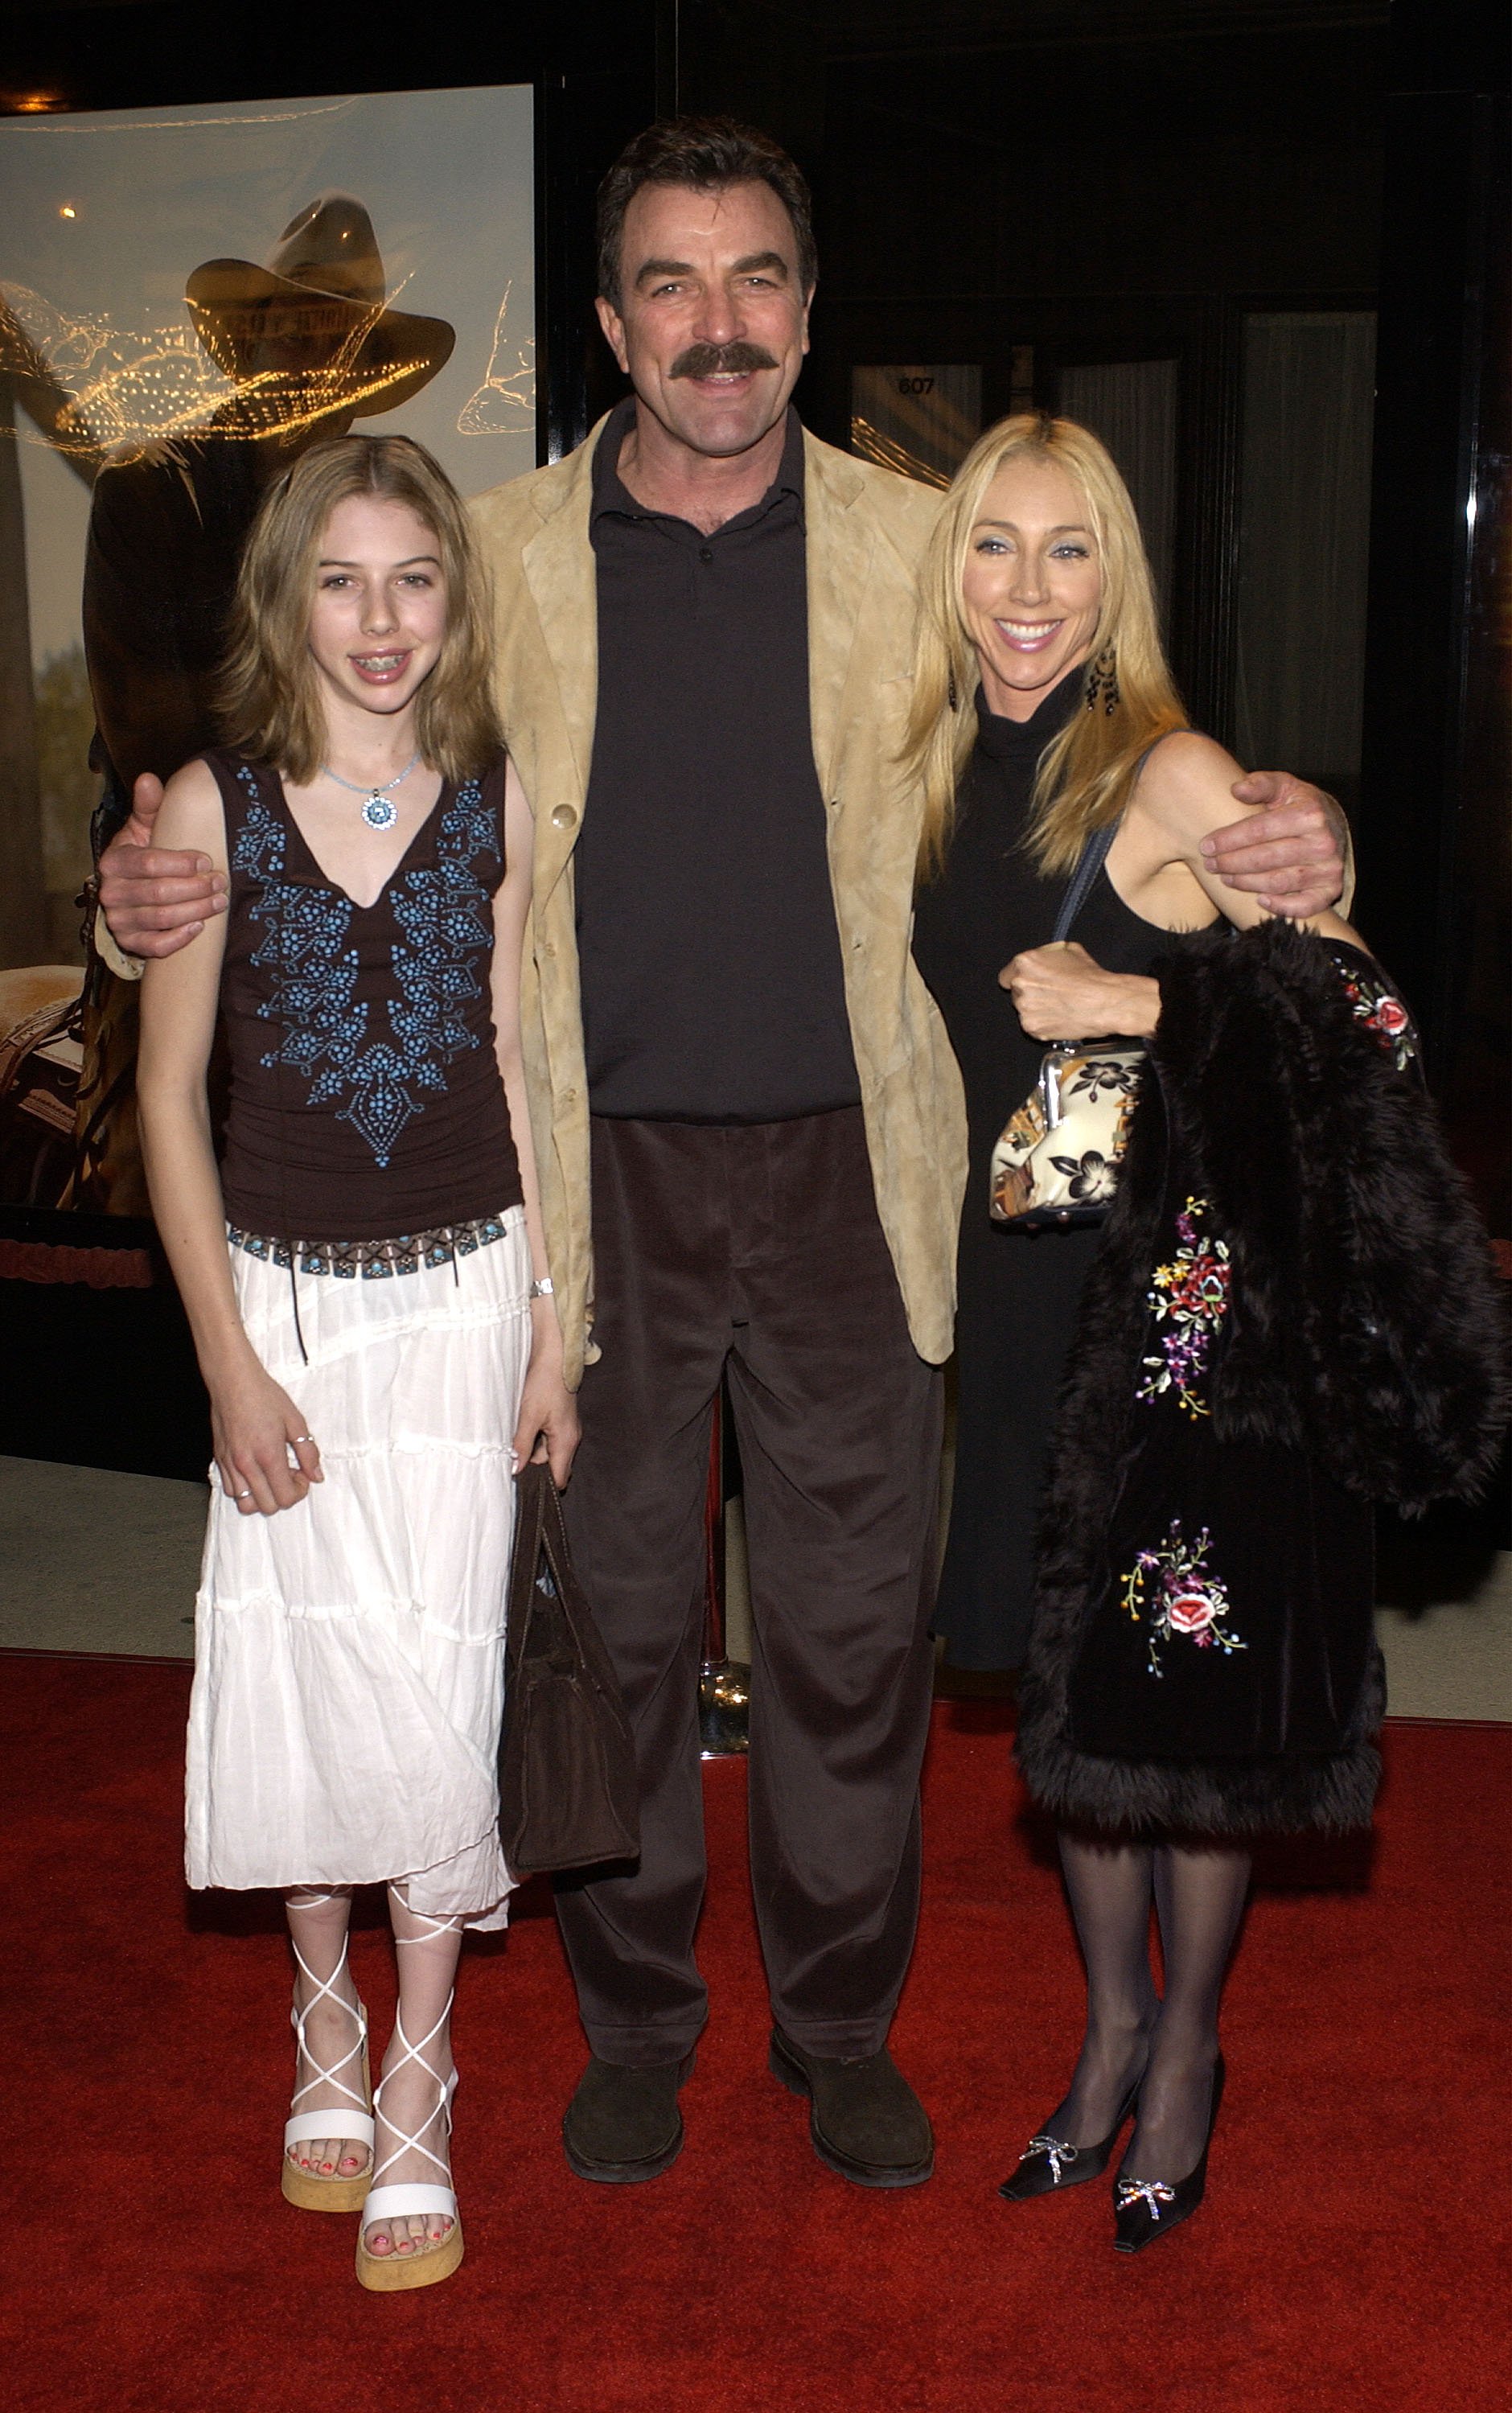 Tom Selleck with wife Jillie Mack and daughter Hannah attending the premiere of "Monte Walsh" on January 8, 2003 at the Warner Bros. Studios in Burbank, California | Photo: Getty Images